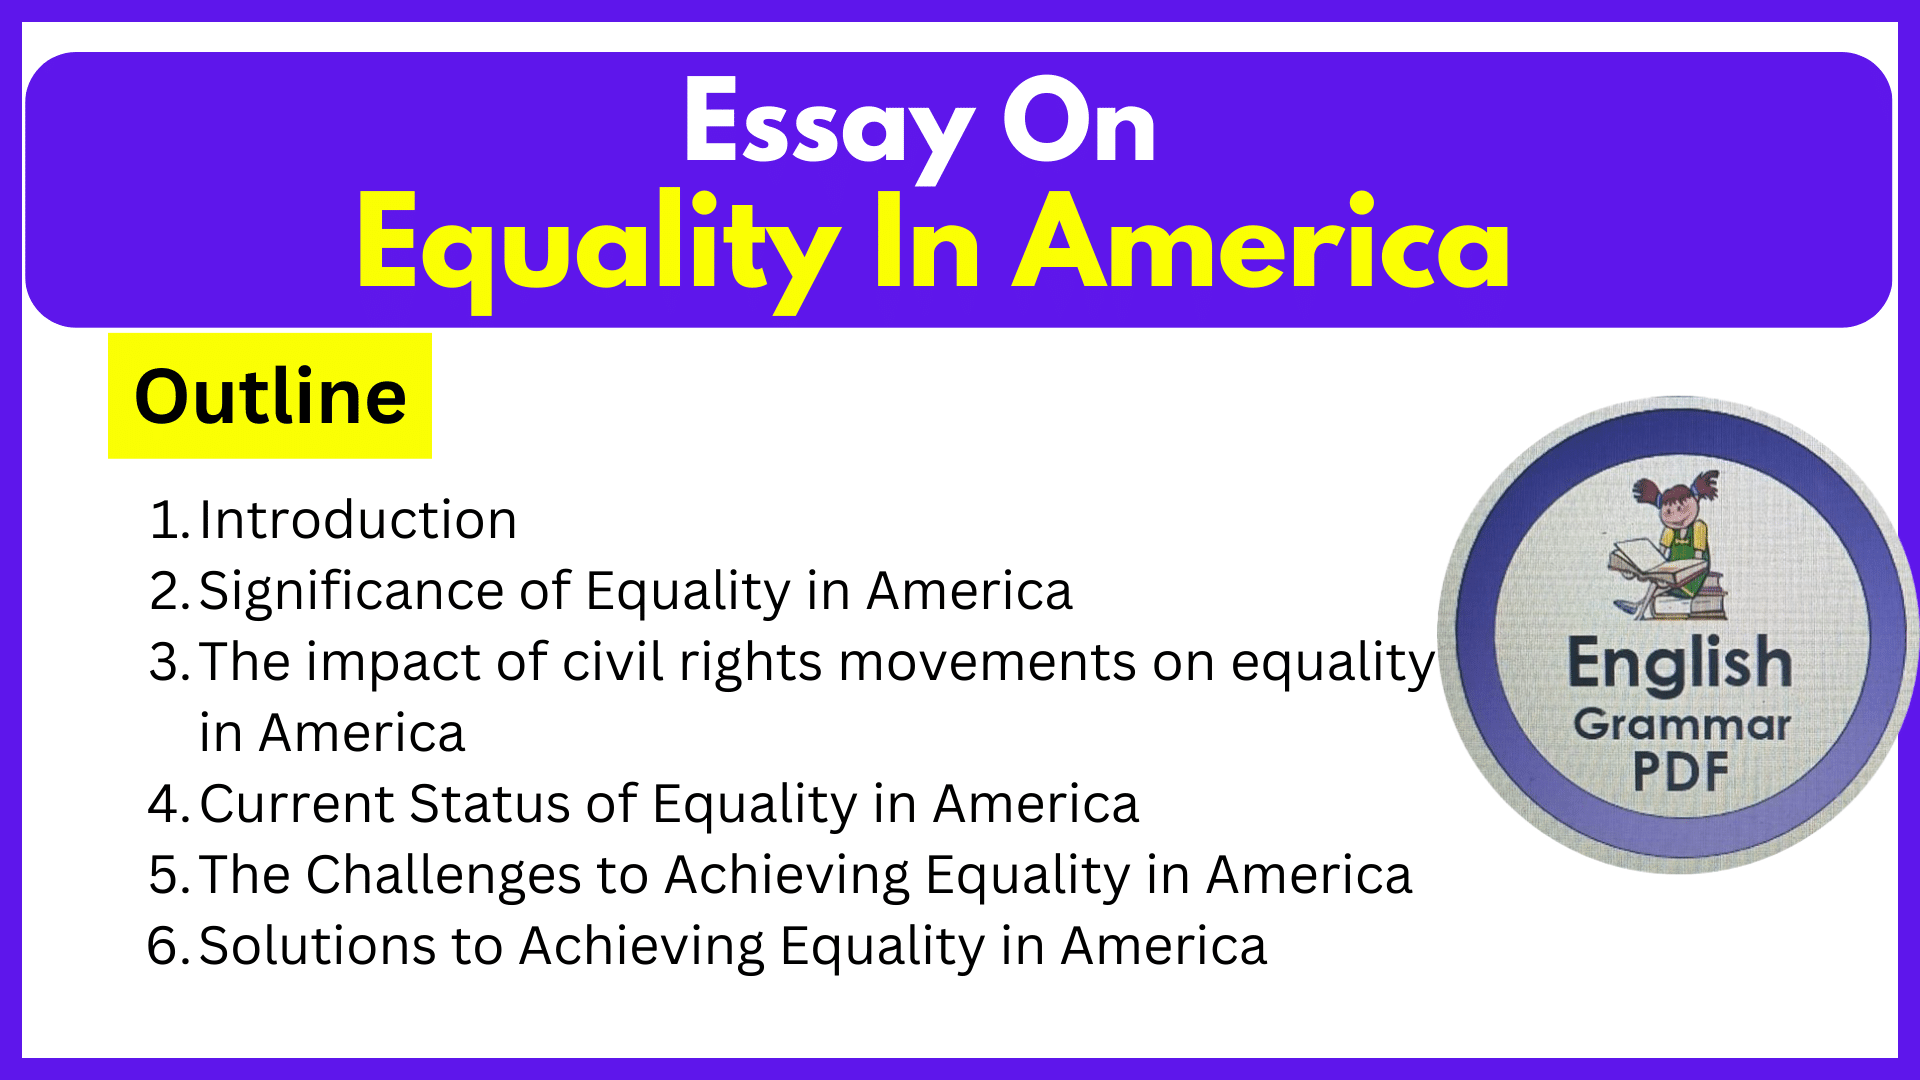 Essay On Equality In America